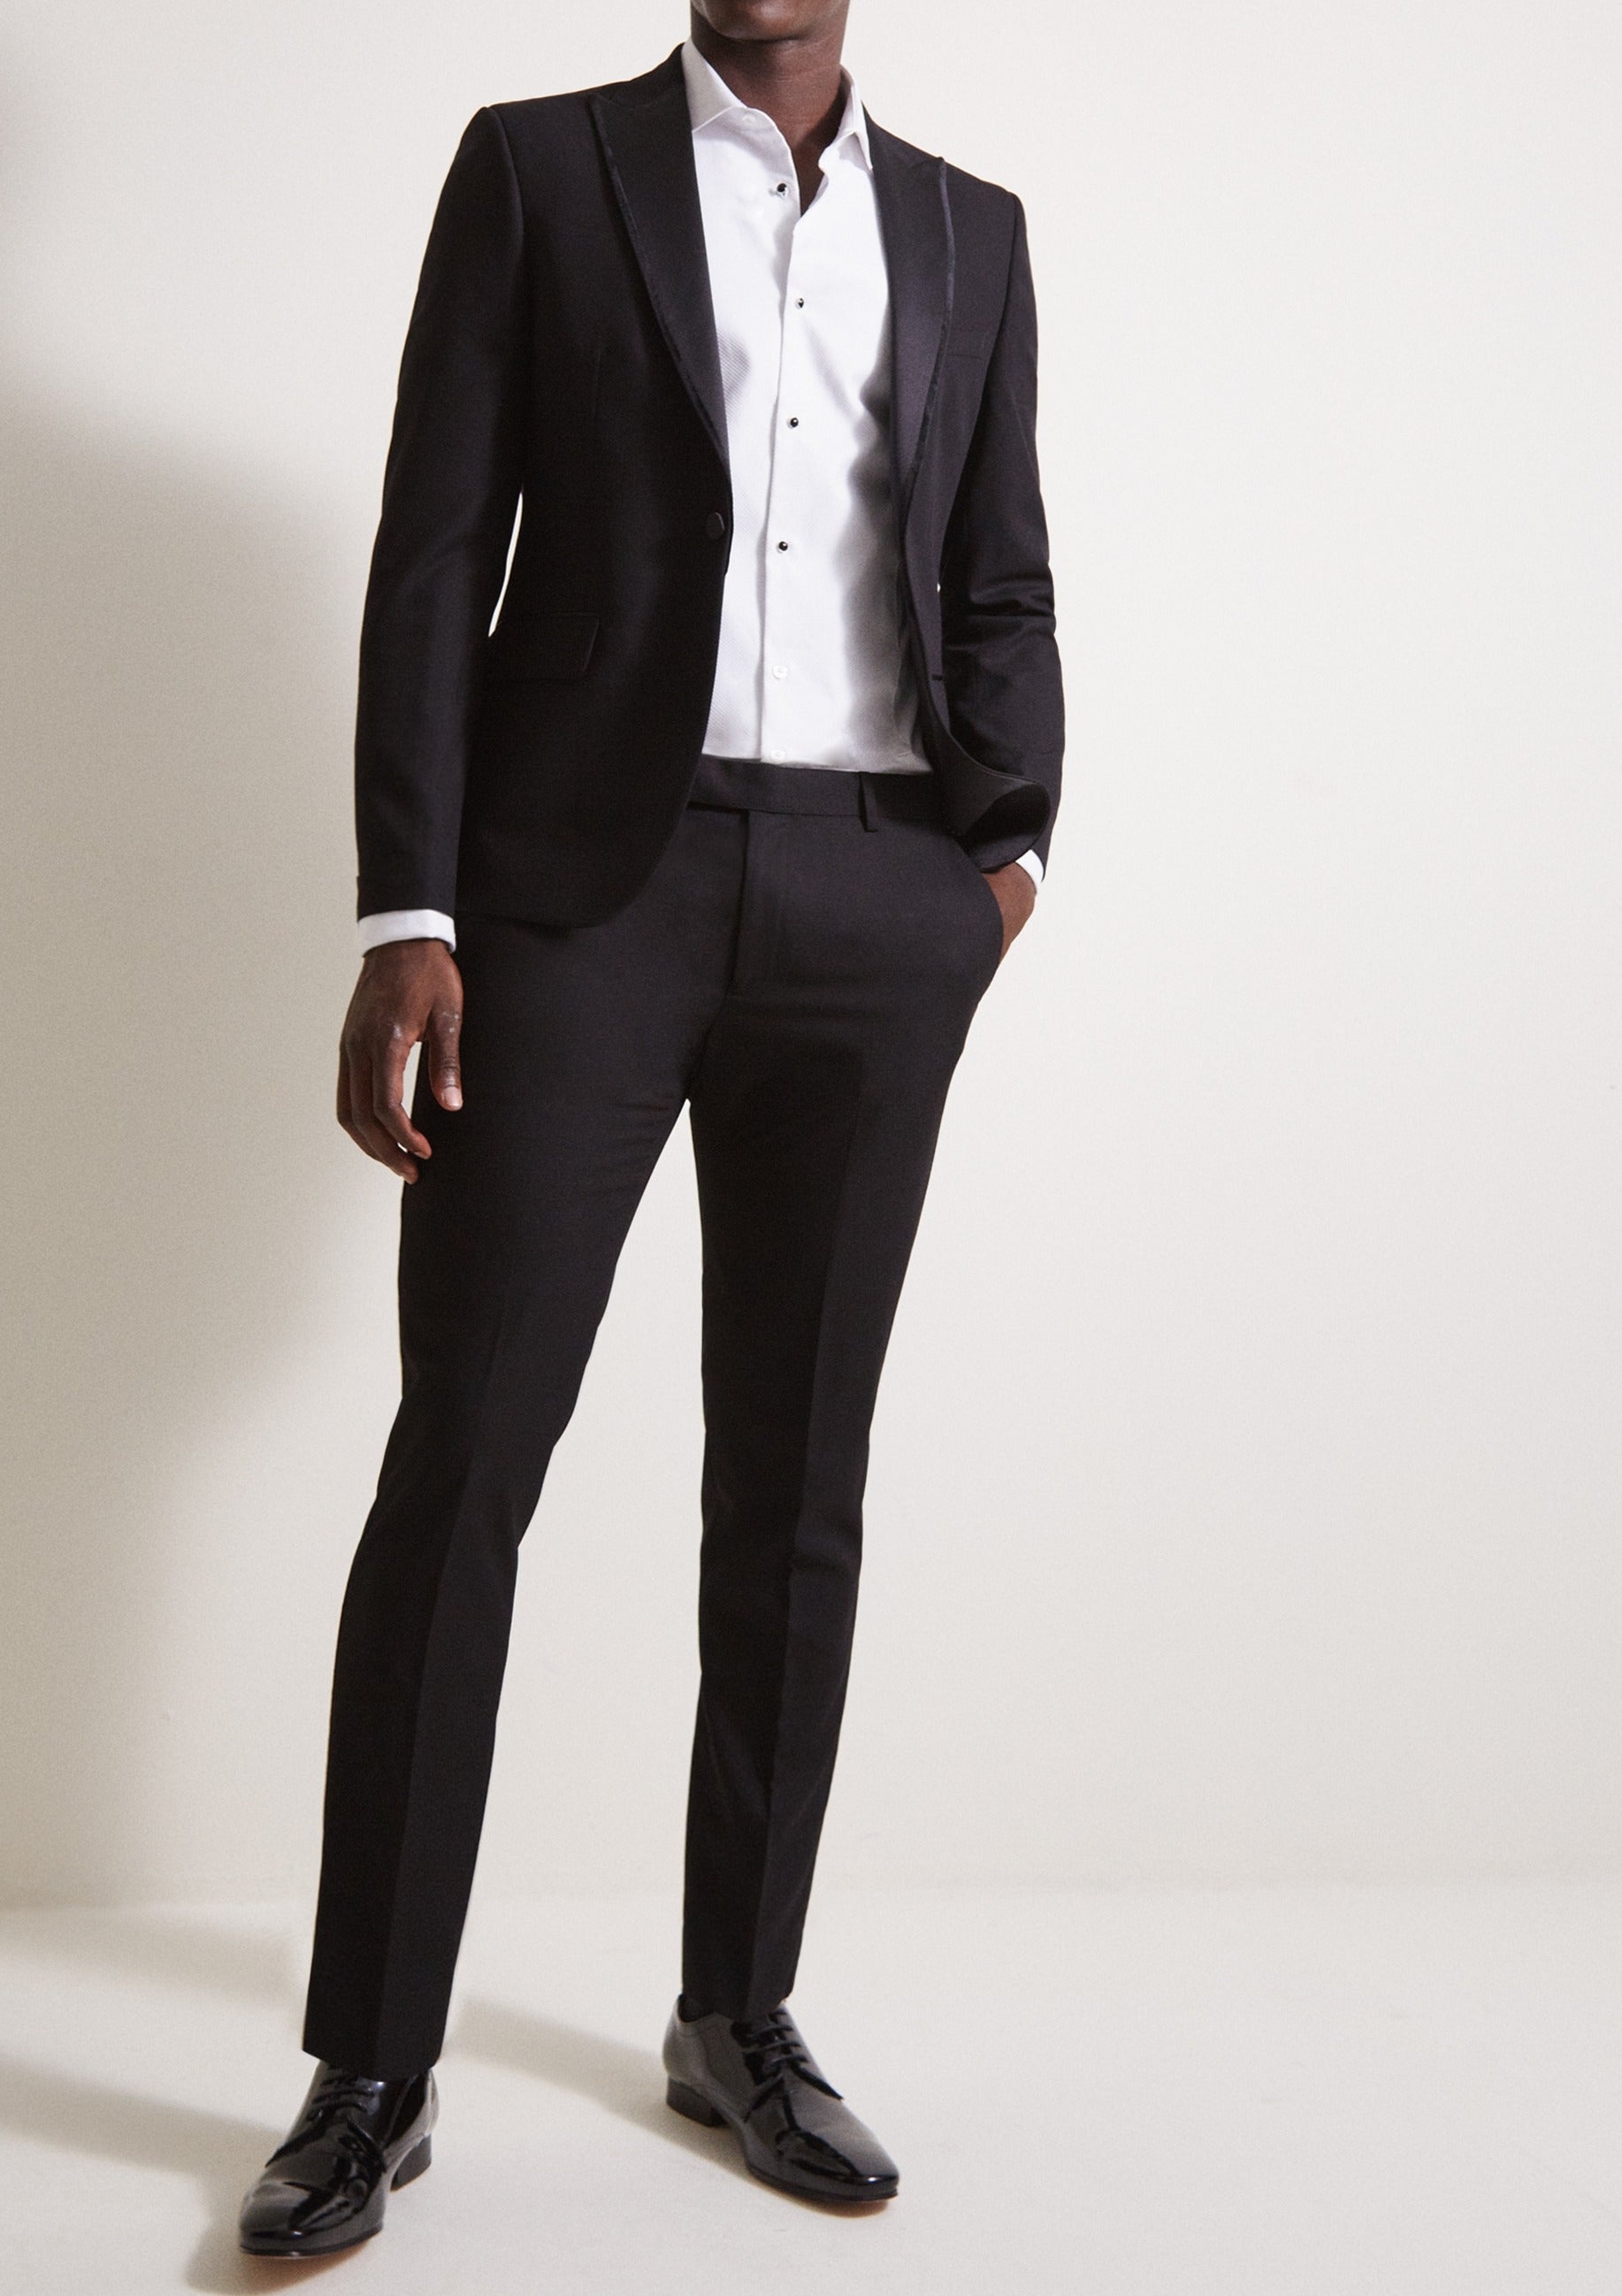 Update more than 152 tuxedo suit for men